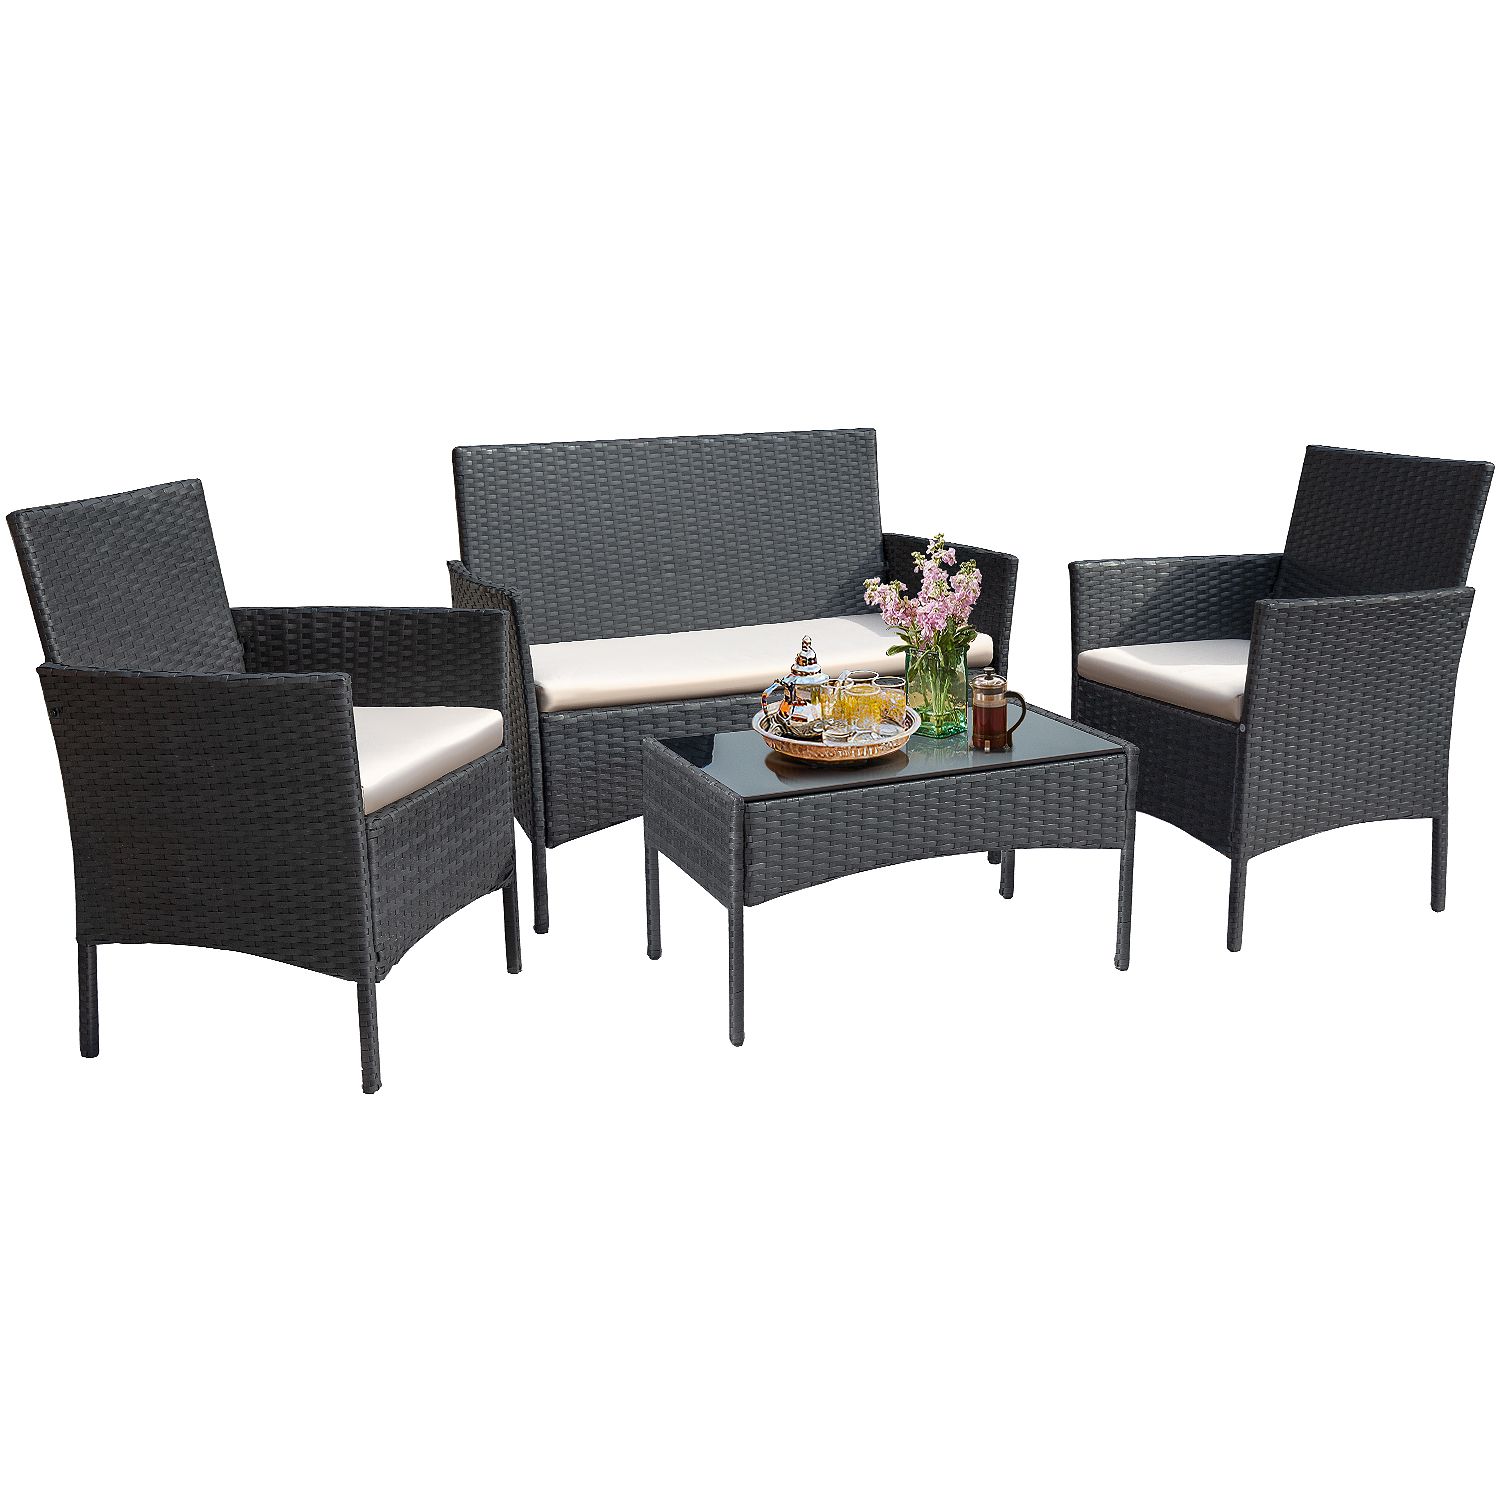 Lacoo 4 Piece Outdoor Patio Furniture PE Rattan Wicker Table and Chairs Set, Beige - image 2 of 7